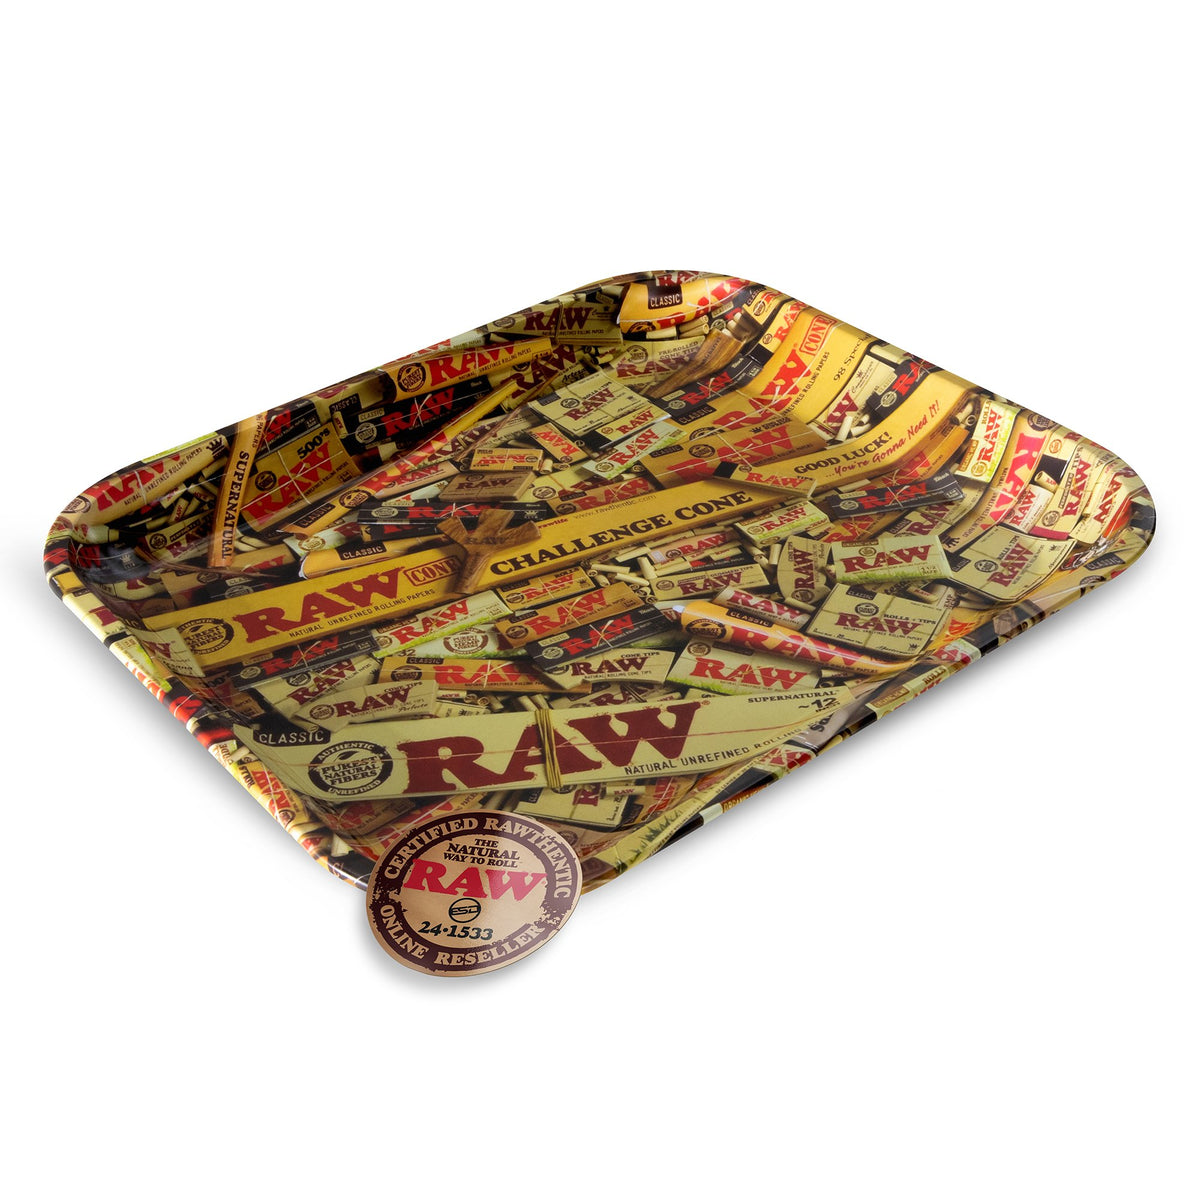 RAW Mix Rolling Trays Rolling Trays WAR00109-MUSA01 esd-official